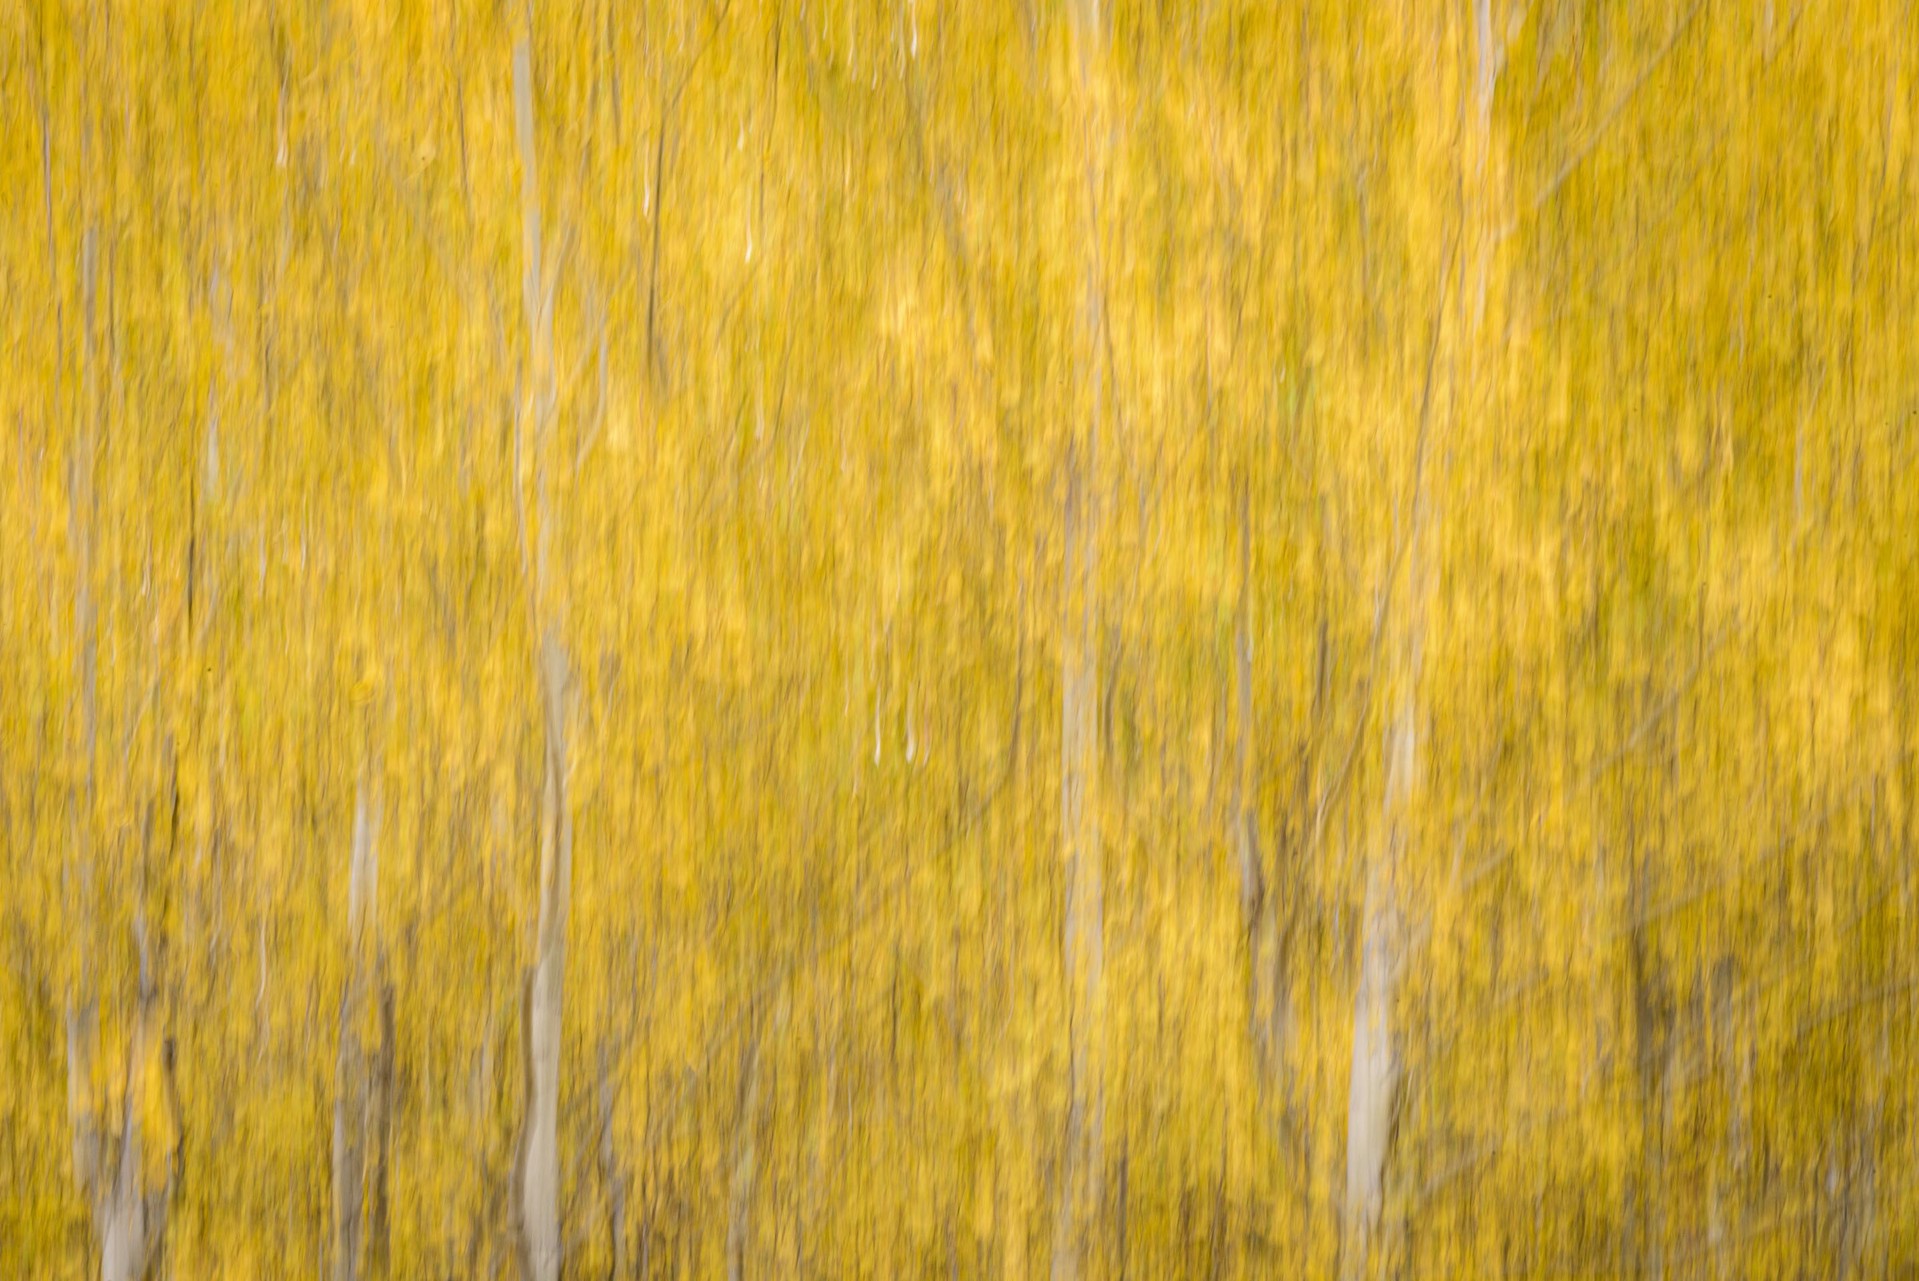 Abstract Photograph Of Aspen Trees In The Fall With Yellow Leaves, Framed And Printed On Metal By Dwight Vasel 